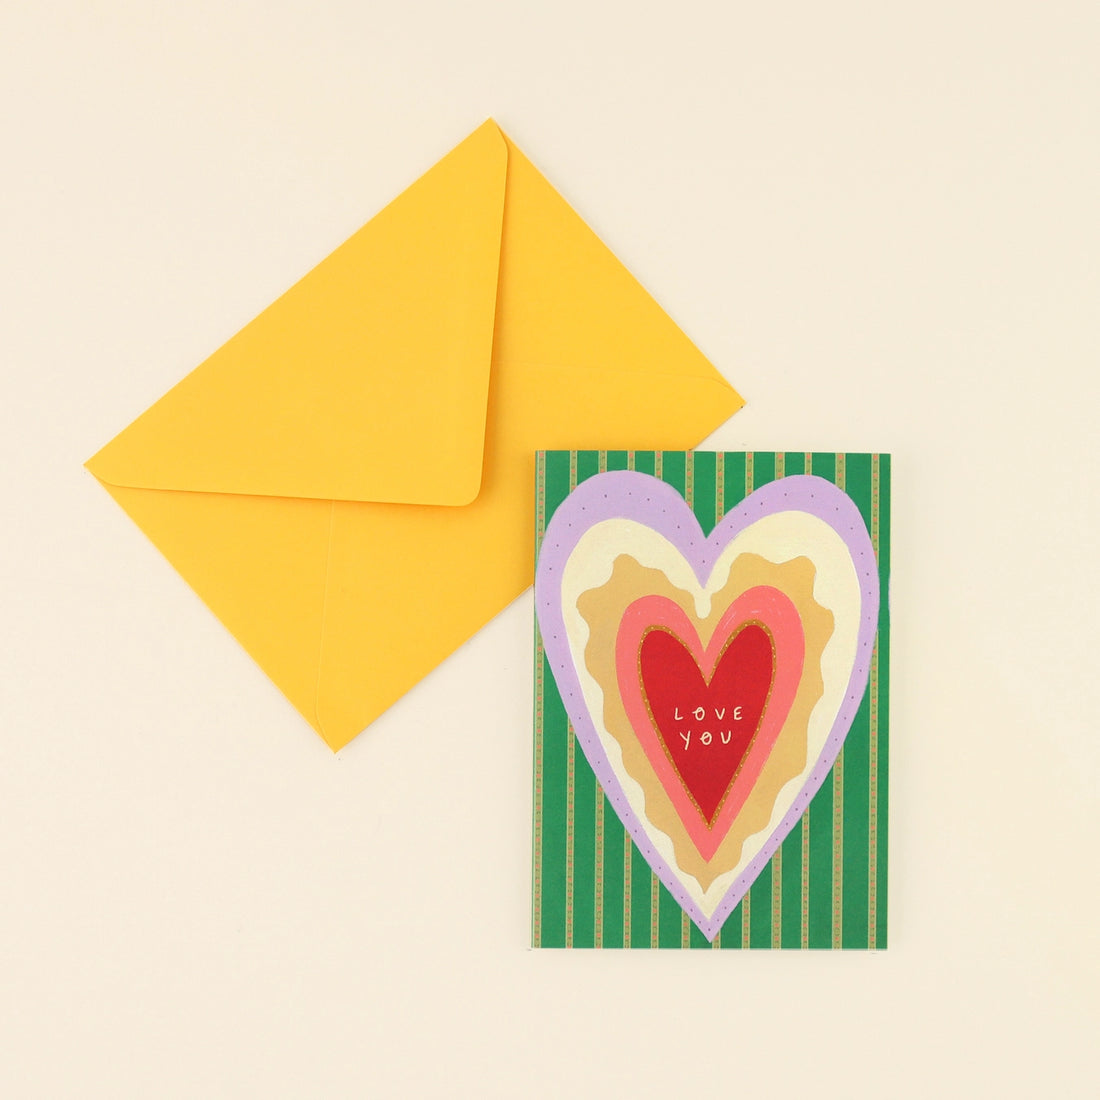 Giant Heart 'Love You' card by Little Black Cat